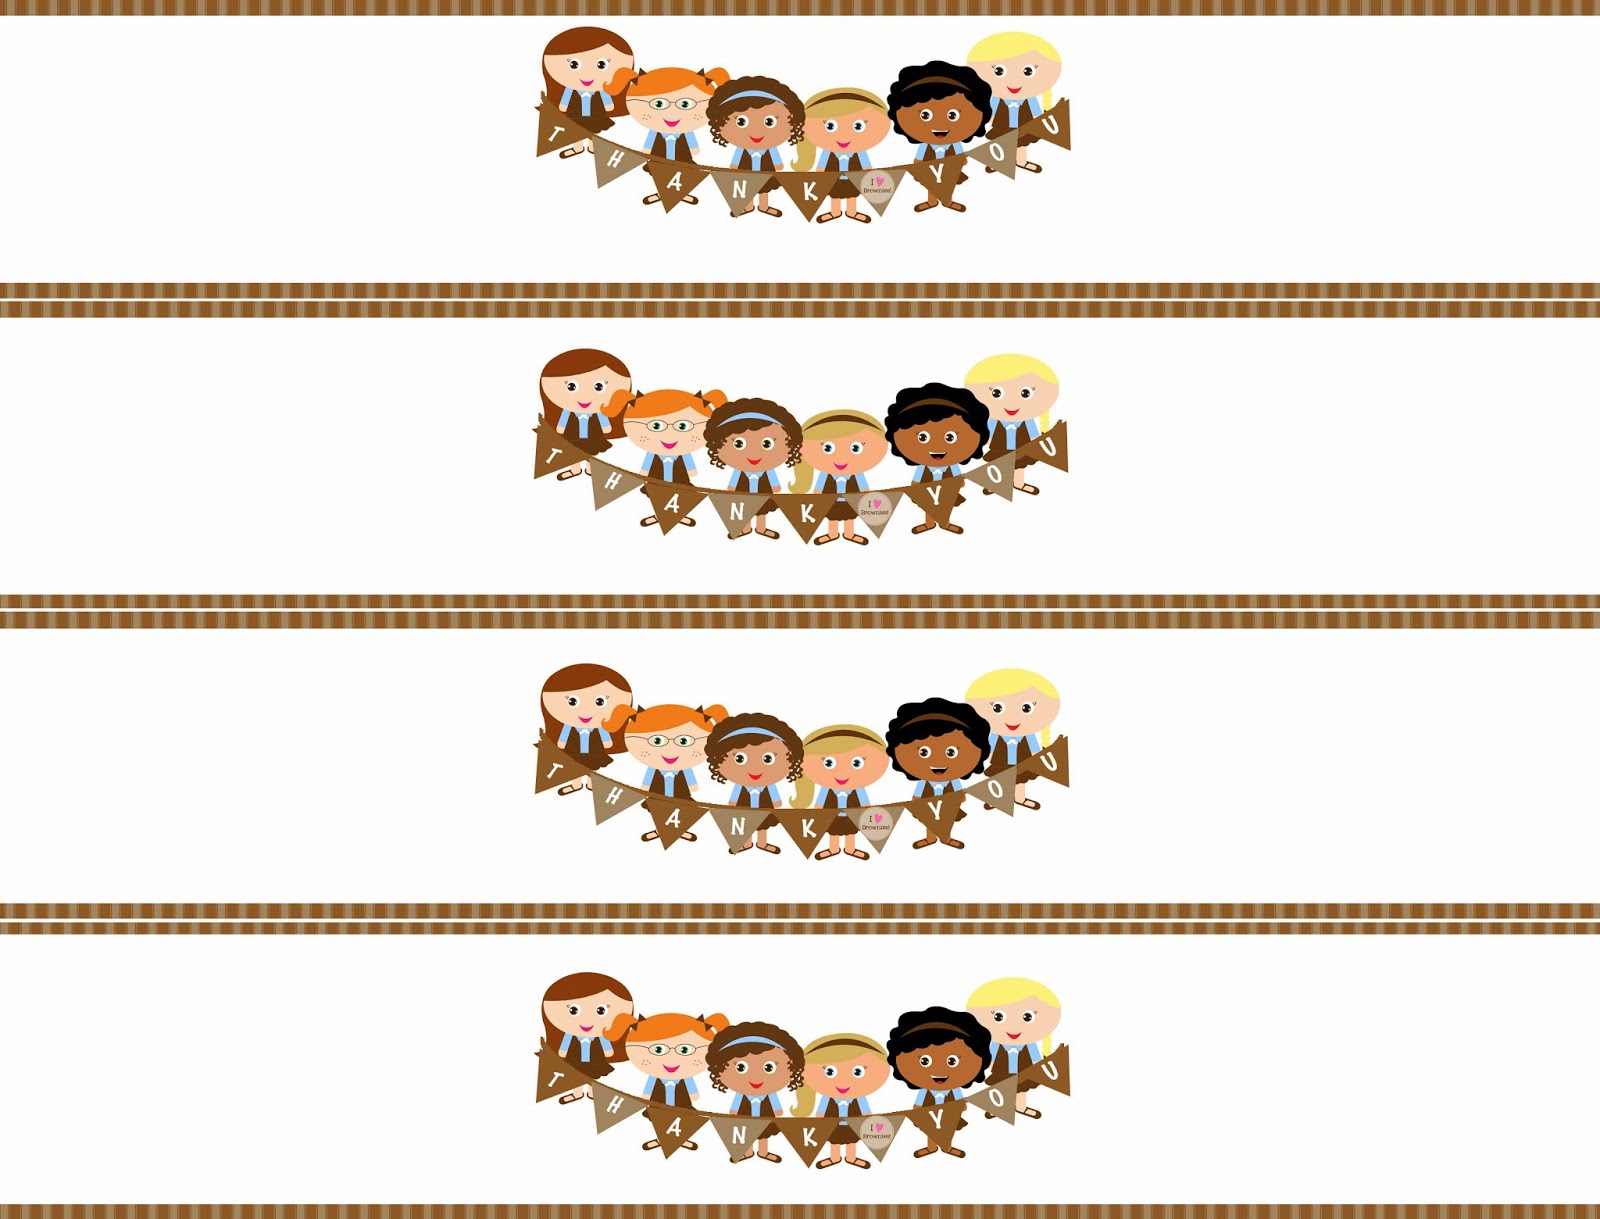 Brownie Girl Scout Lock In Clipart   Cliparthut   Free Clipart